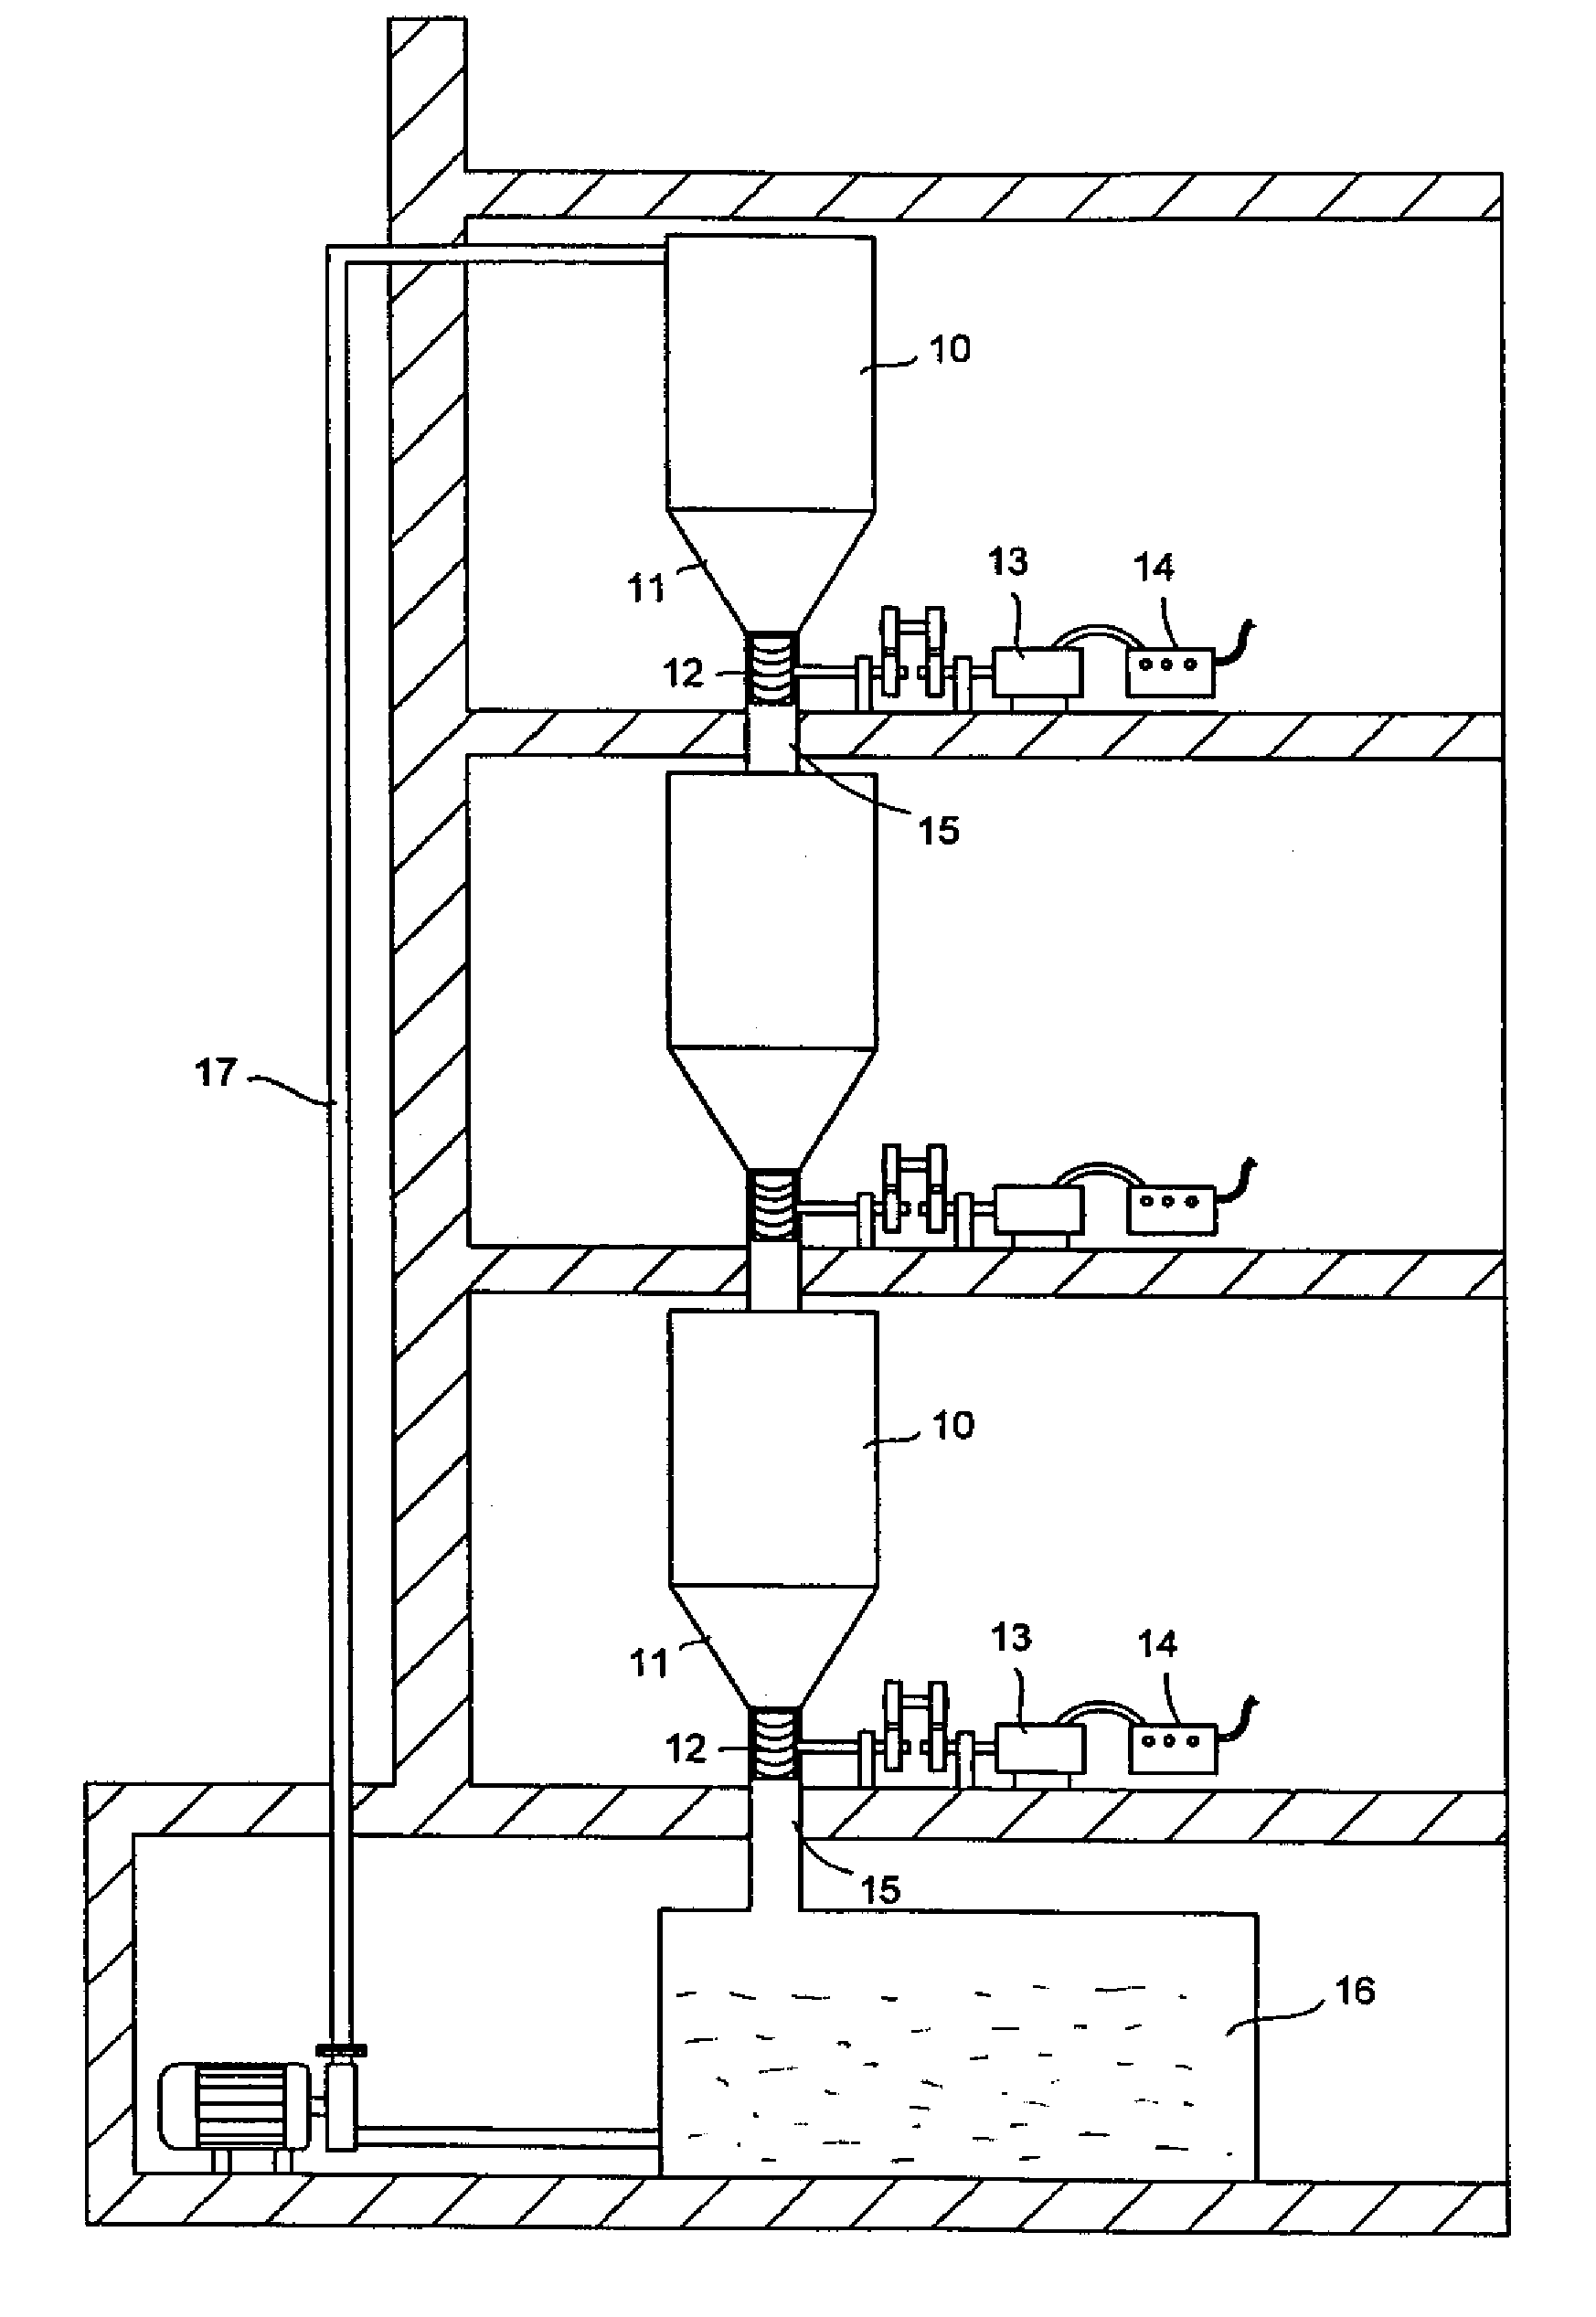 Self-supported power generation device